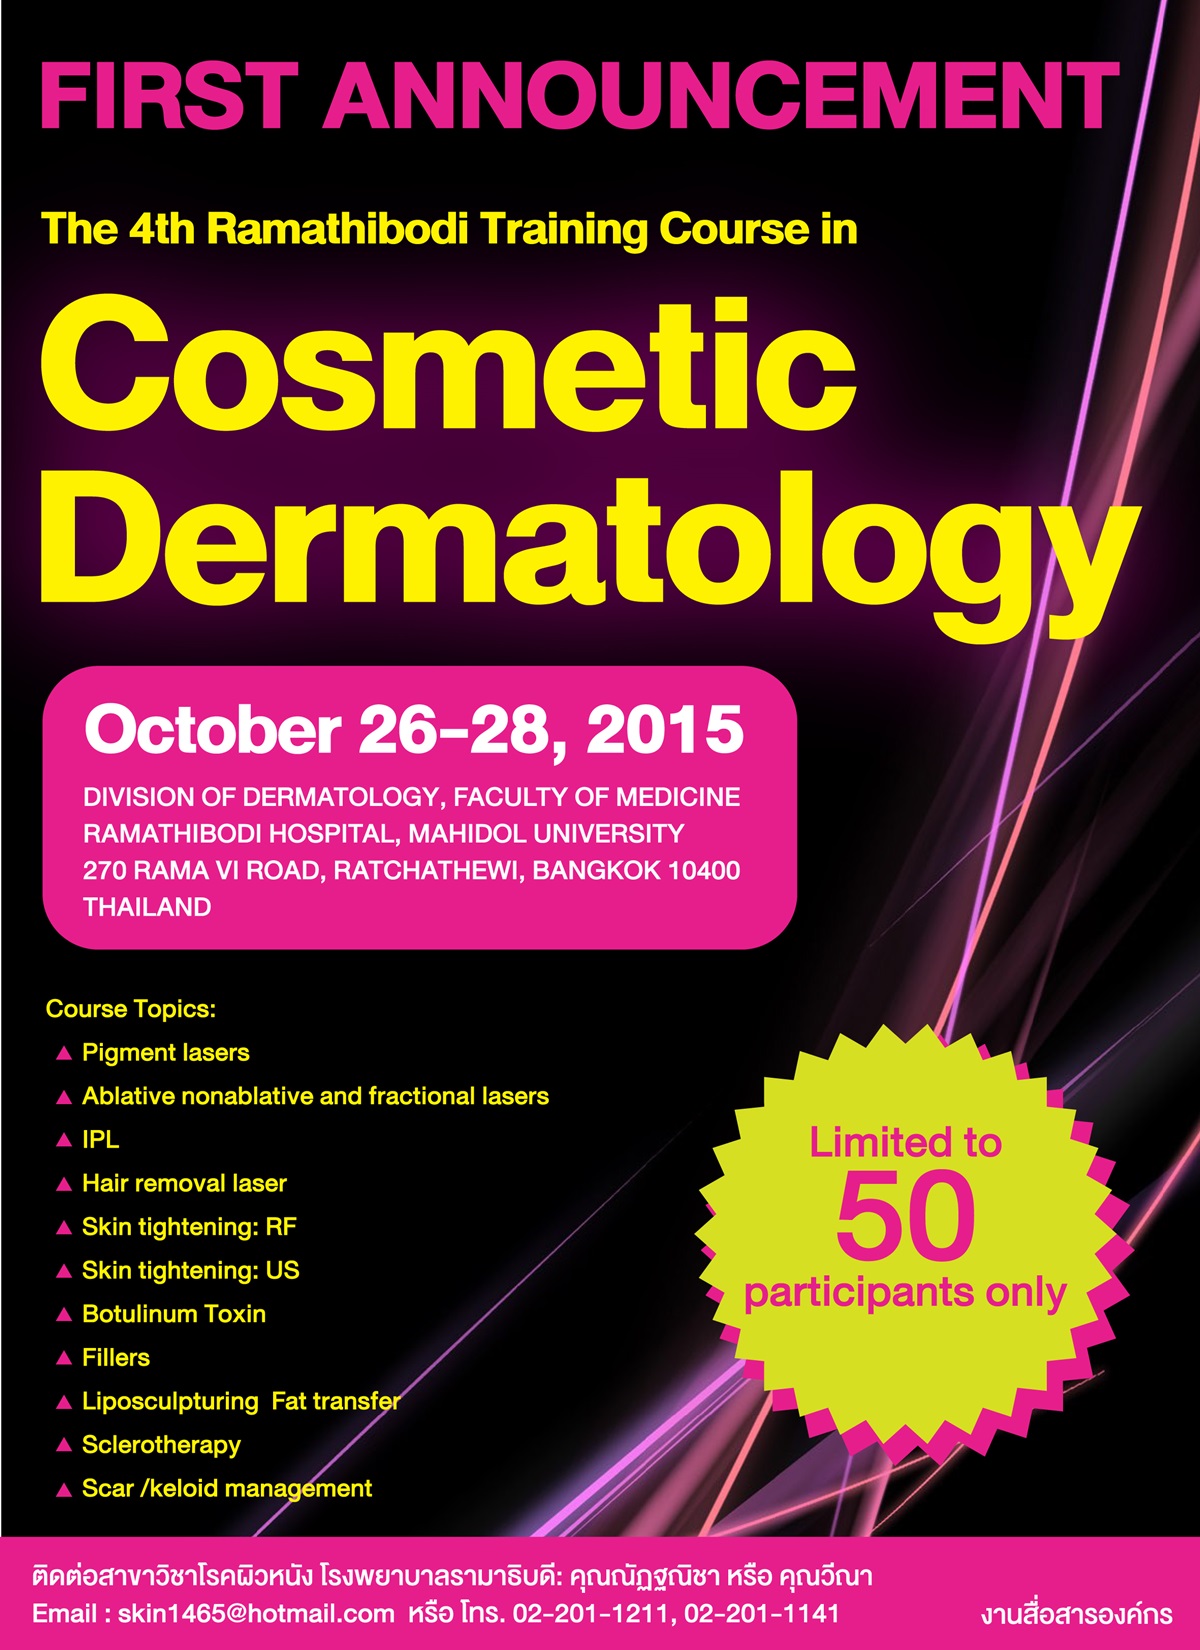 FIRST ANNOUNCEMENT The 4th Ramathibodi Training Course in Cosmetic Dermatology 